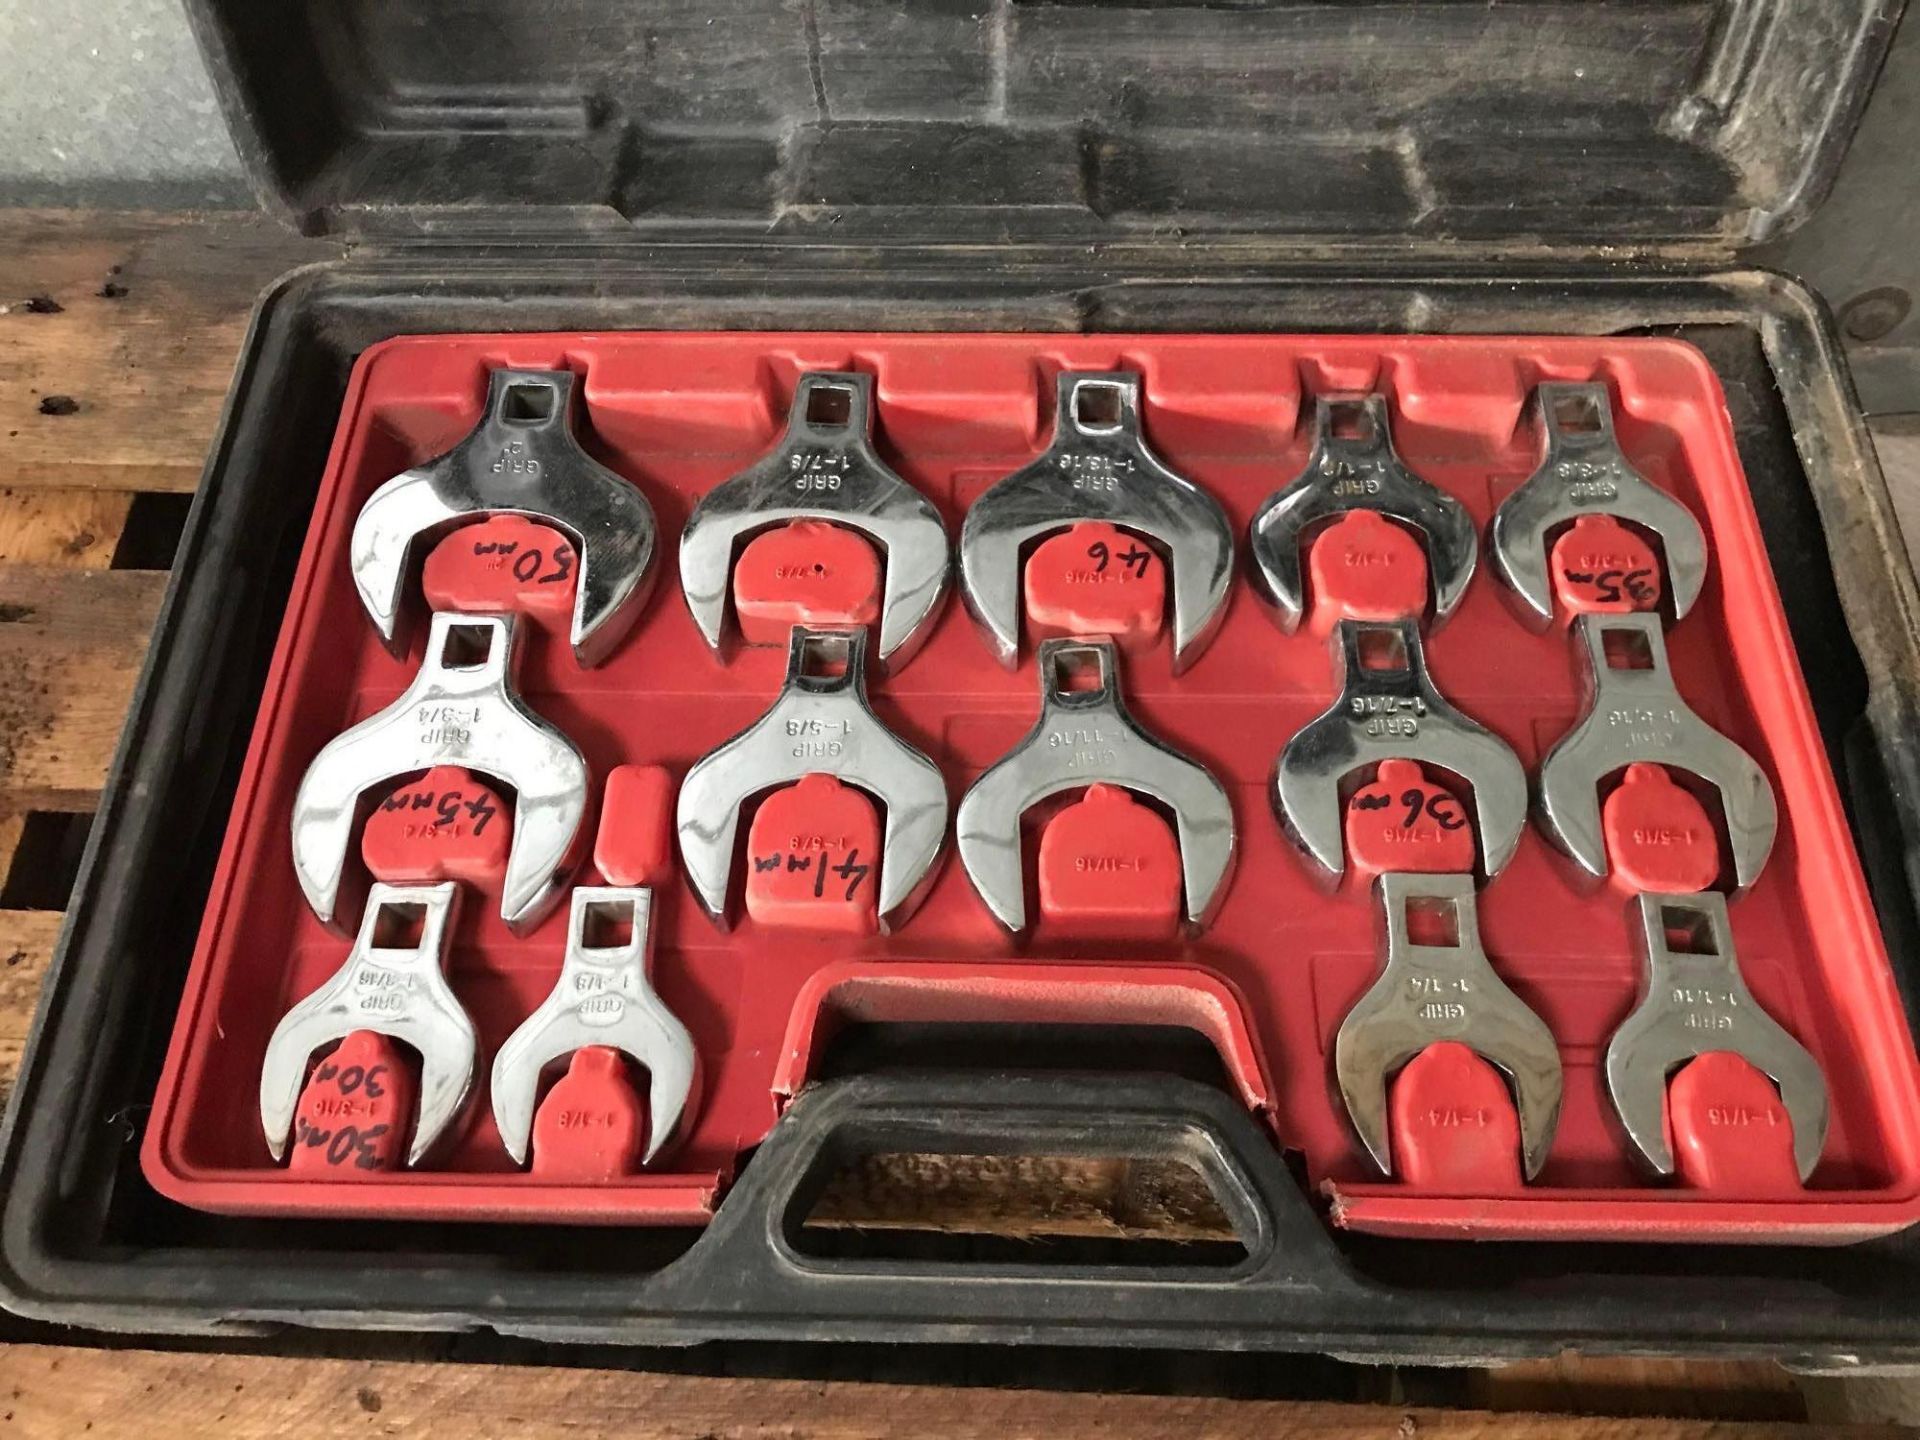 14 piece crows foot spanner set - Image 2 of 2